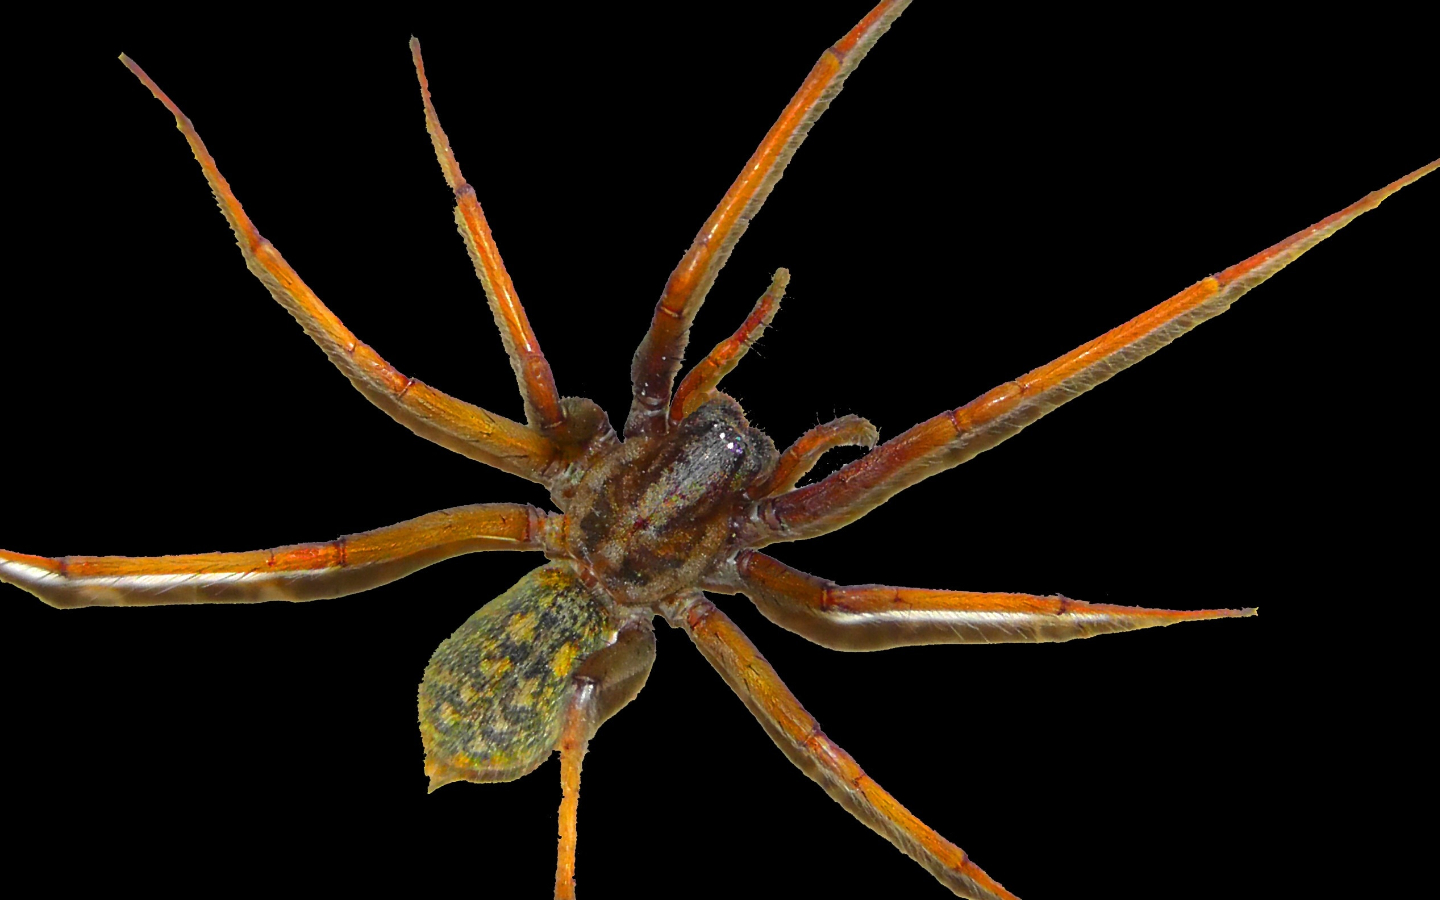 Blog - Why Even Non-Venomous Texas Spiders Can Be Dangerous Pests